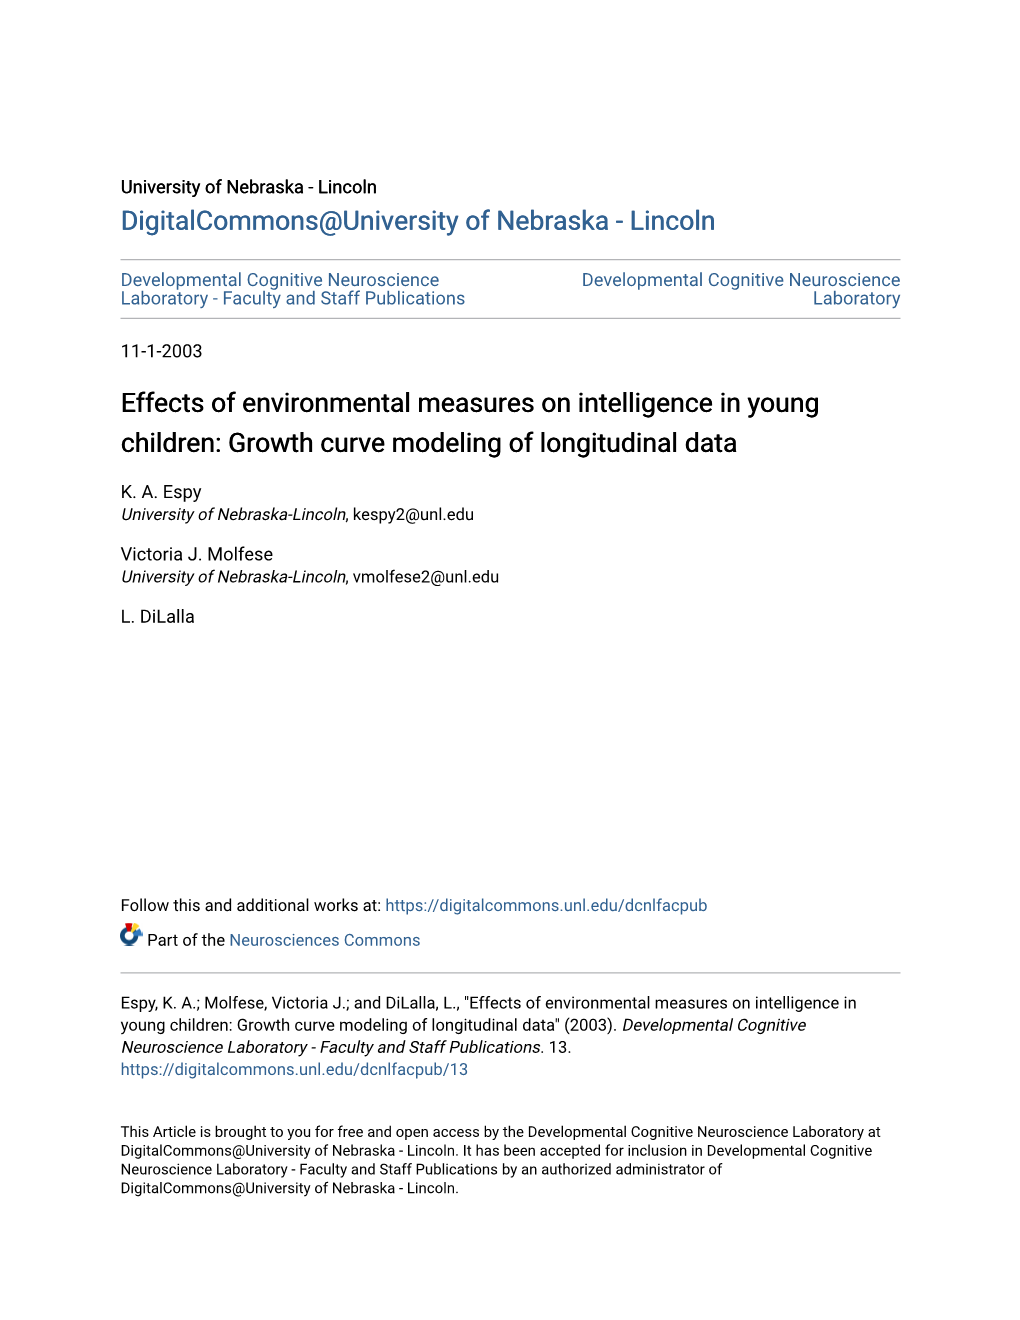 Effects of Environmental Measures on Intelligence in Young Children: Growth Curve Modeling of Longitudinal Data